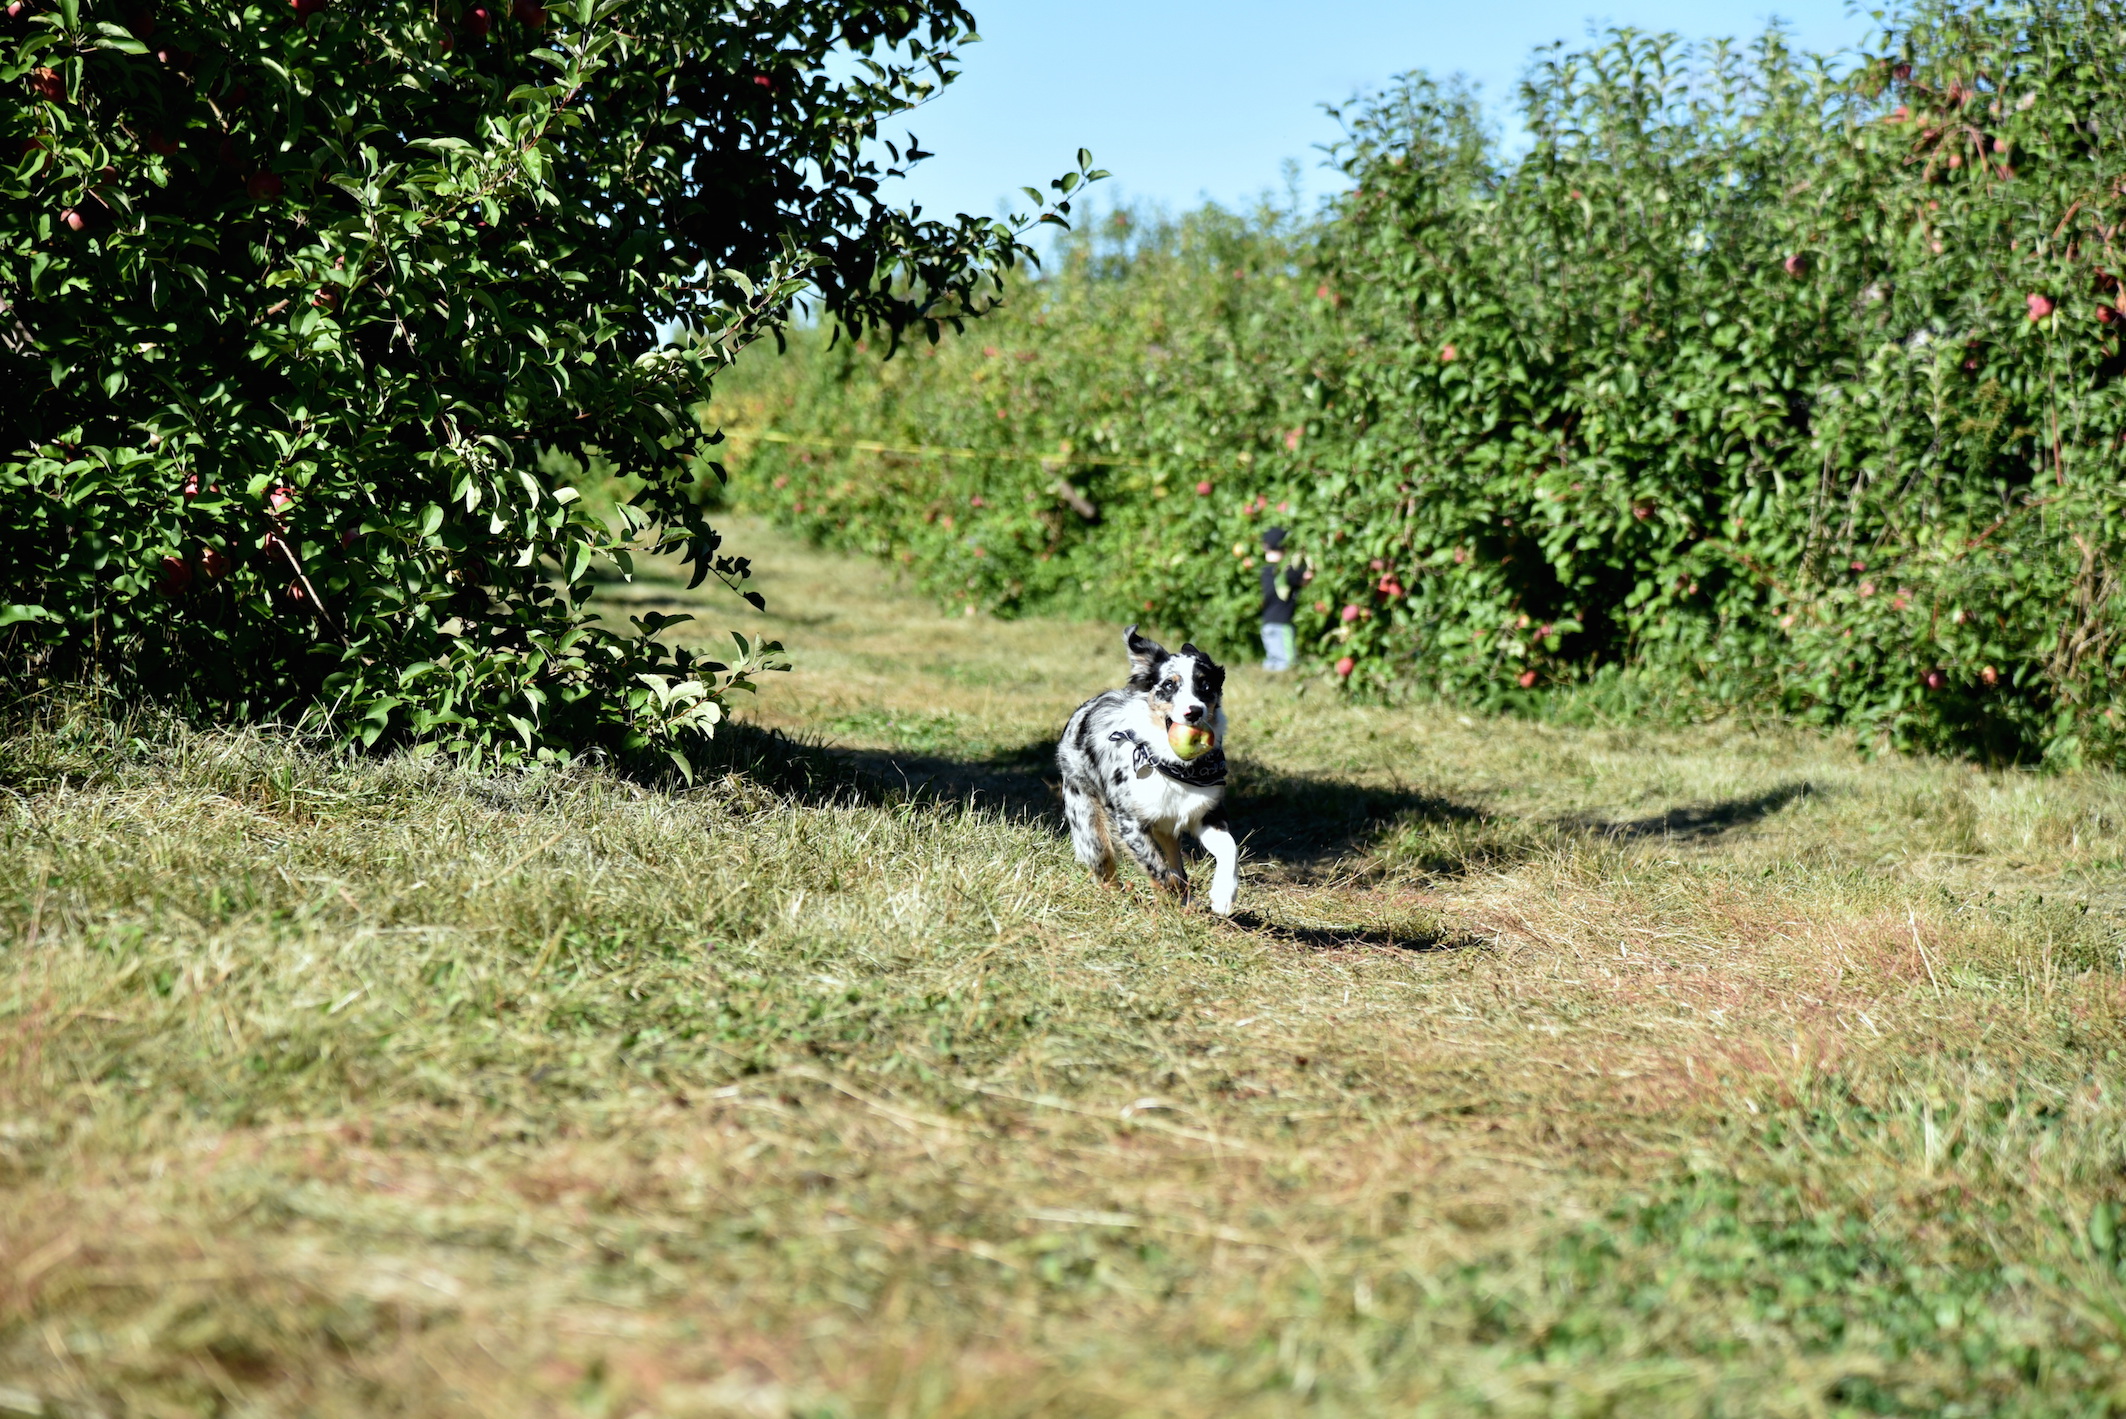 Dog Friendly Apple Picking Place outside New York